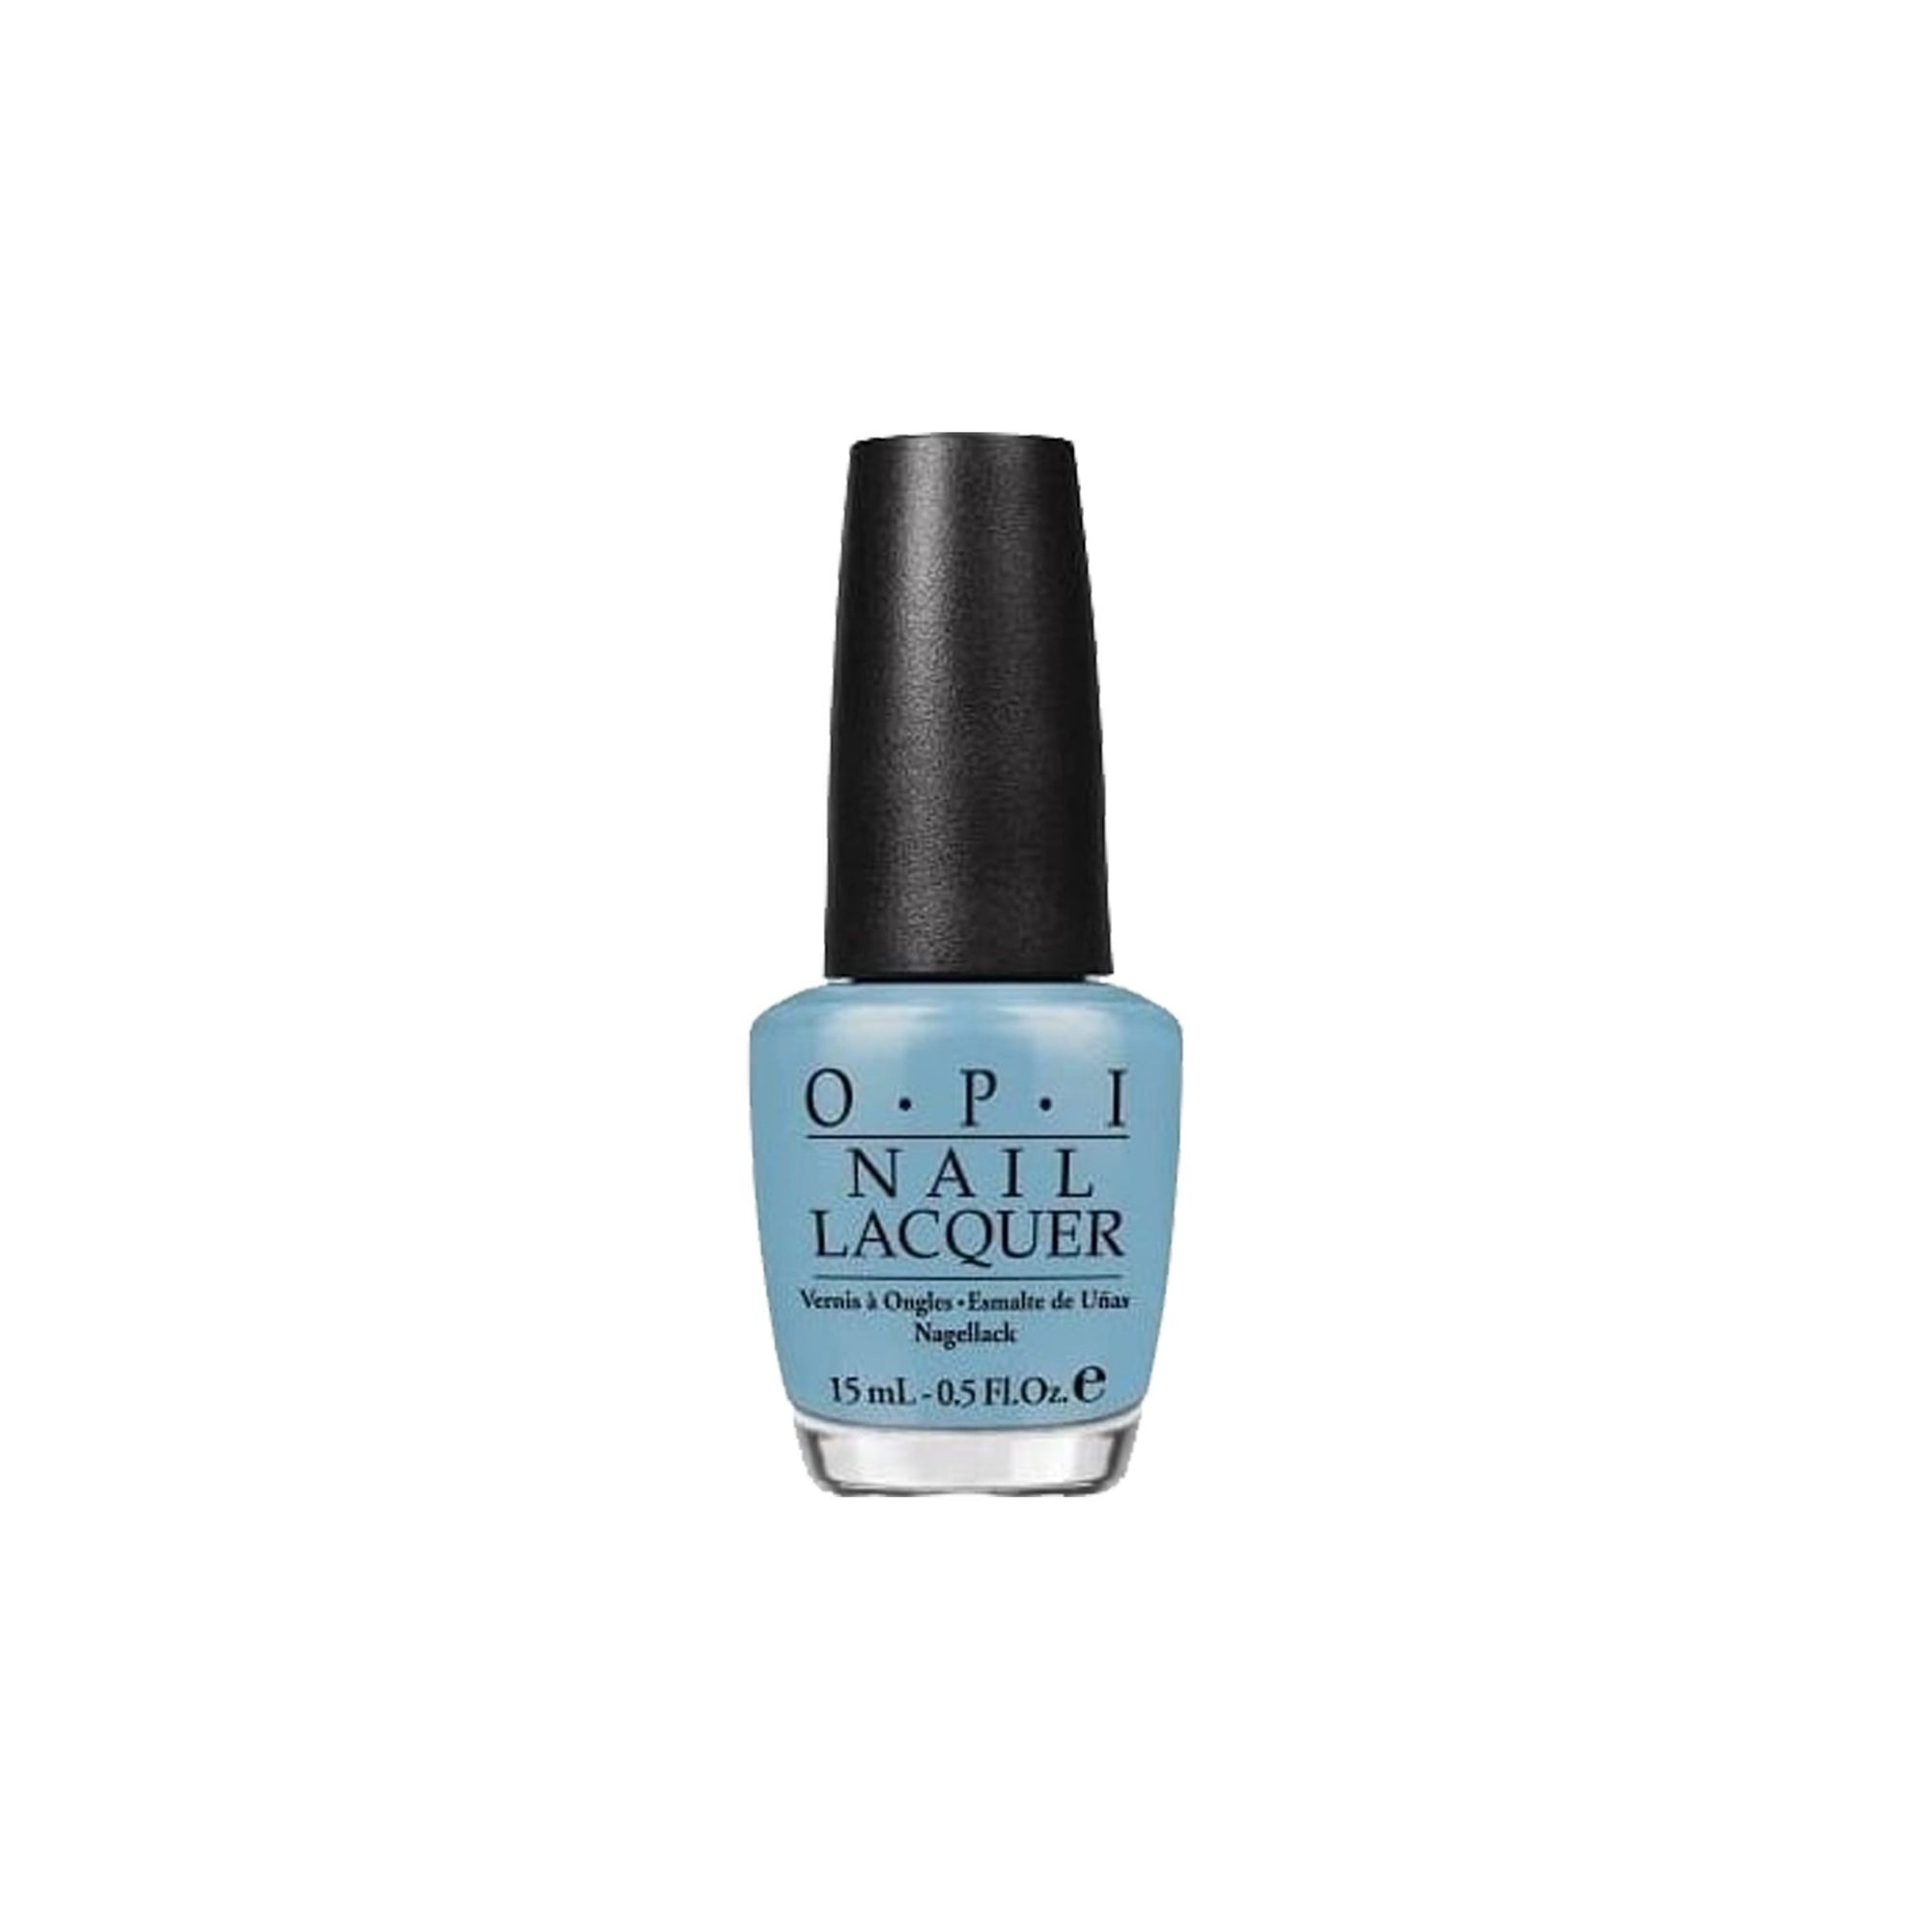 O.P.I Nail Lacquer - Cant Find My Czechbook